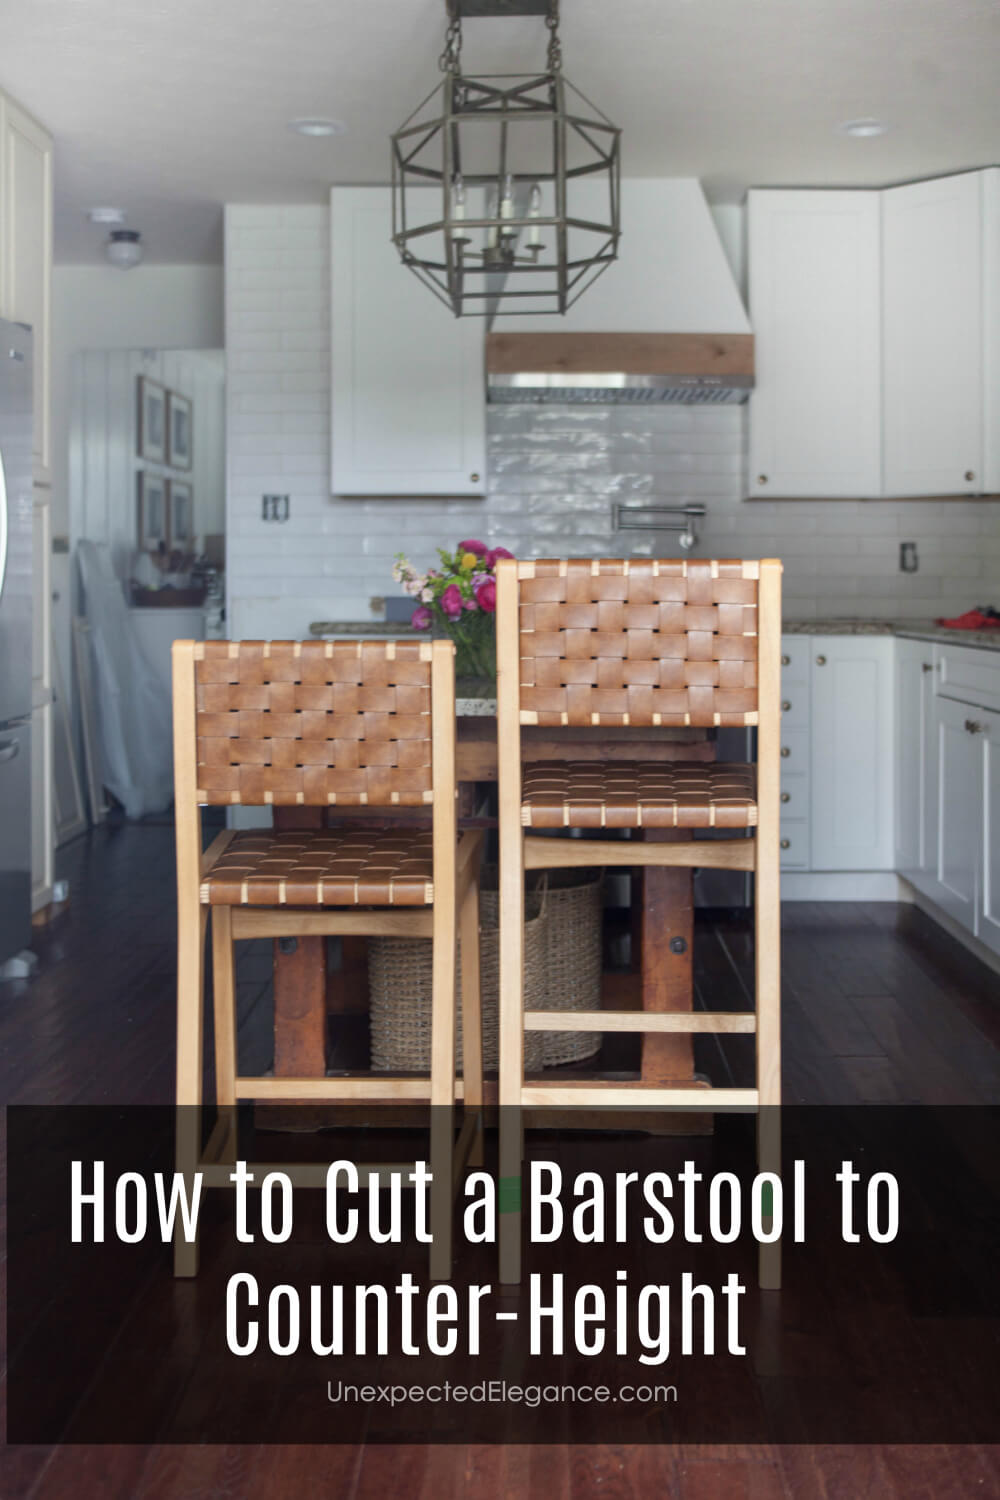 How To Cut A Barstool Counter Height, How To Cut Down Bar Stool Legs